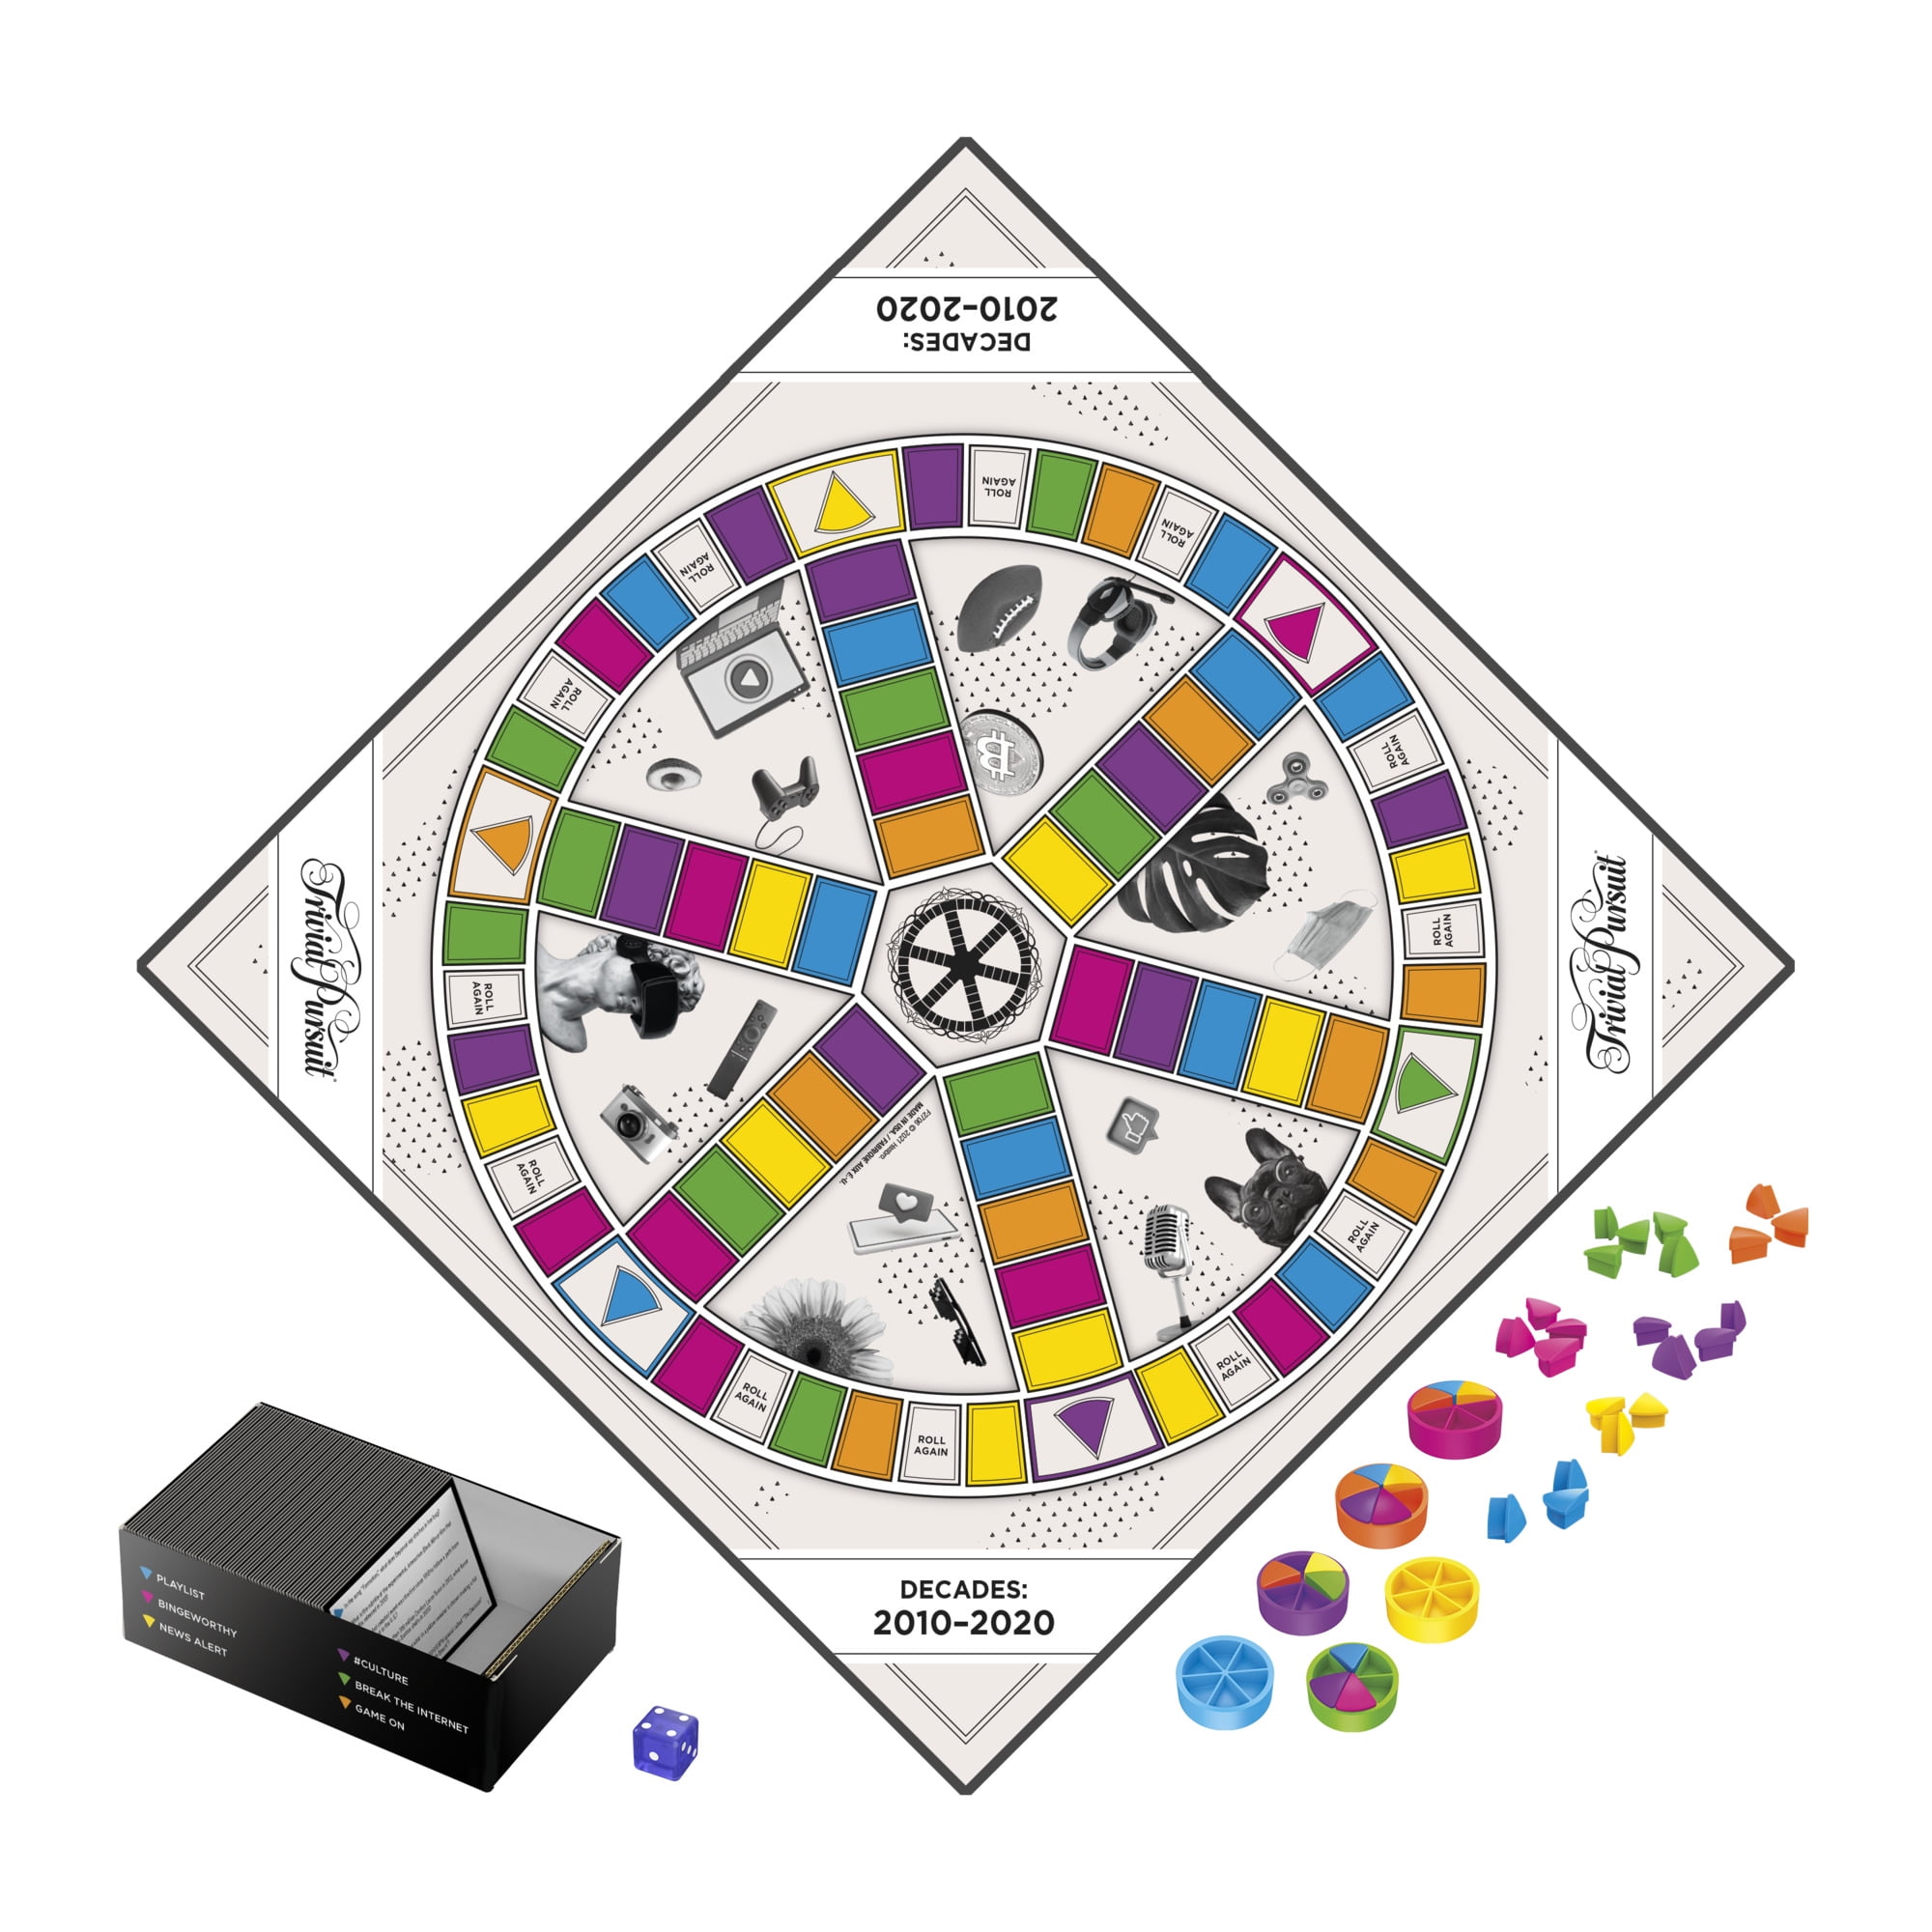 Trivial Pursuit Cards Sample Packs 50 Cards YOU PICK 300 Questions and Answers 